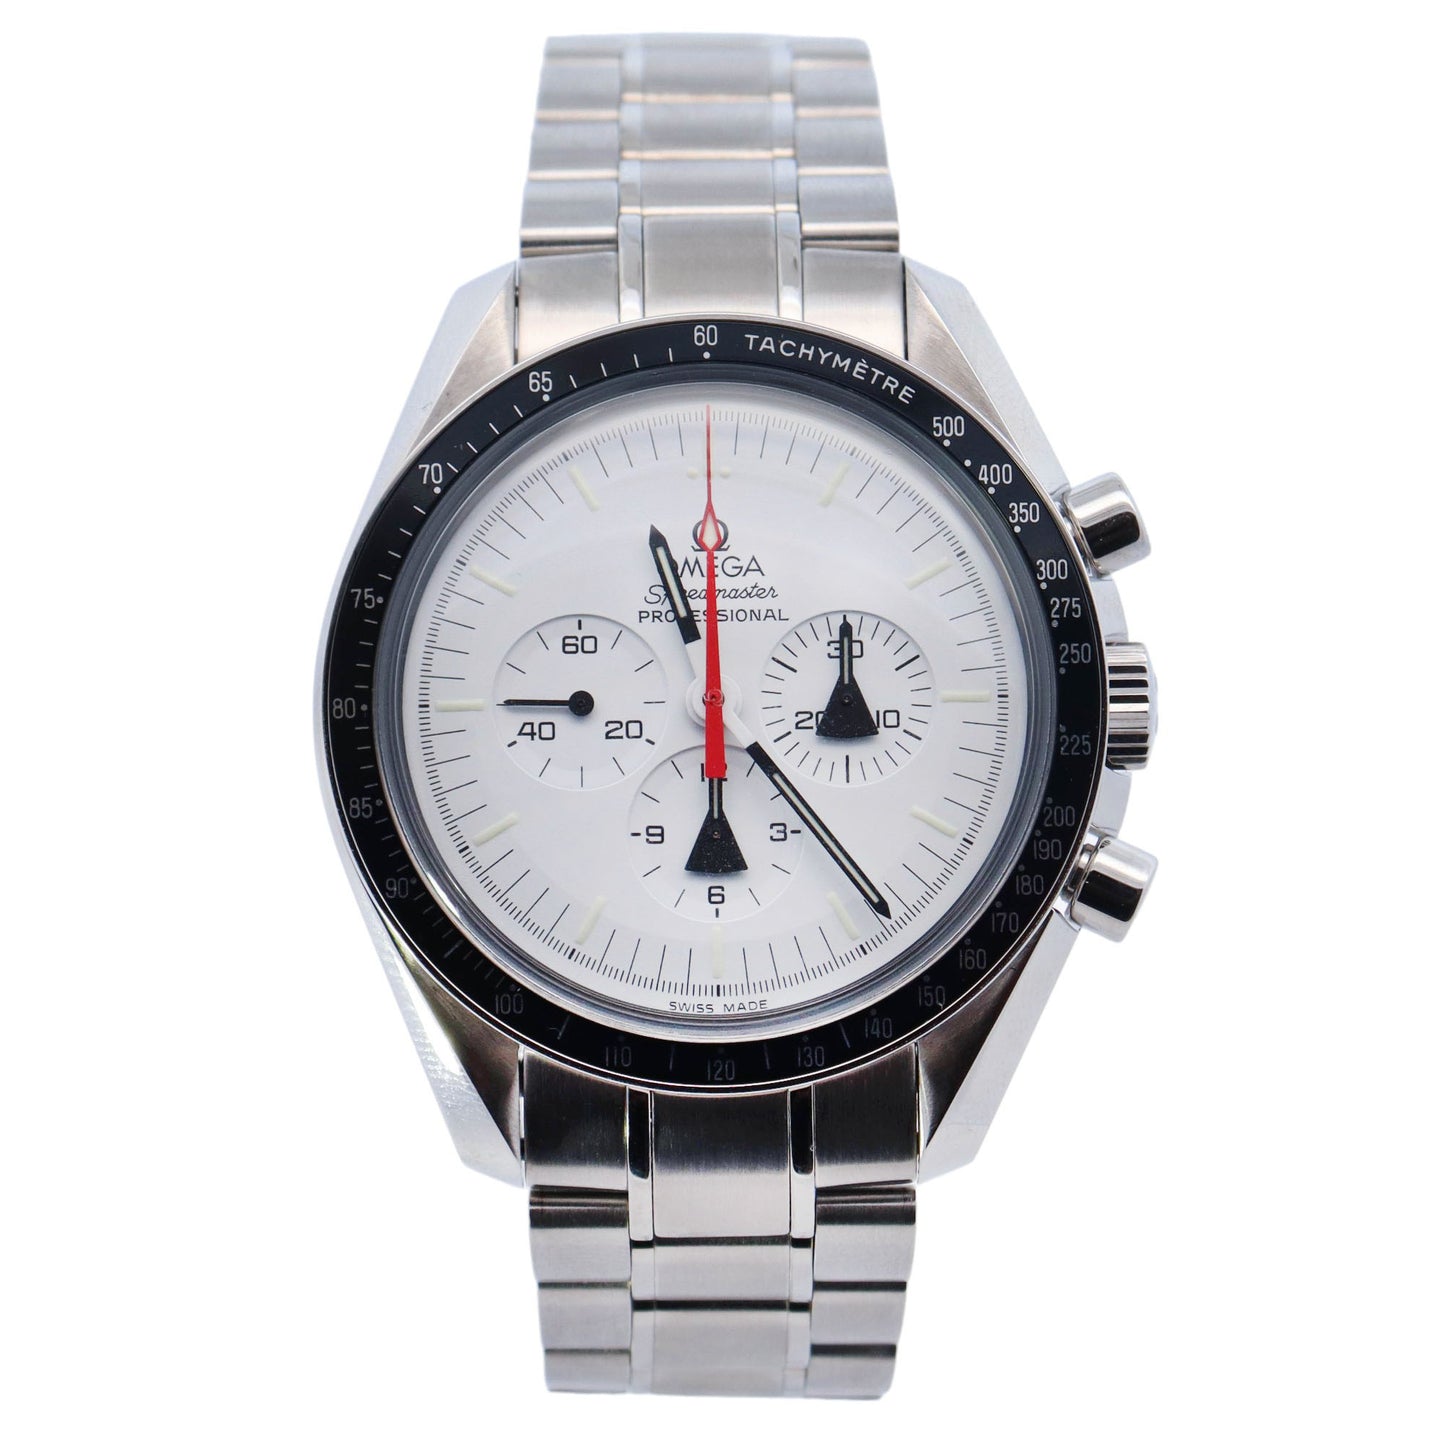 Omega Speedmaster Professional Moonswatch "Alaska Project" Stainless Steel 42mm White Chronograph Dial Watch Reference# 311.32.42.30.04.001